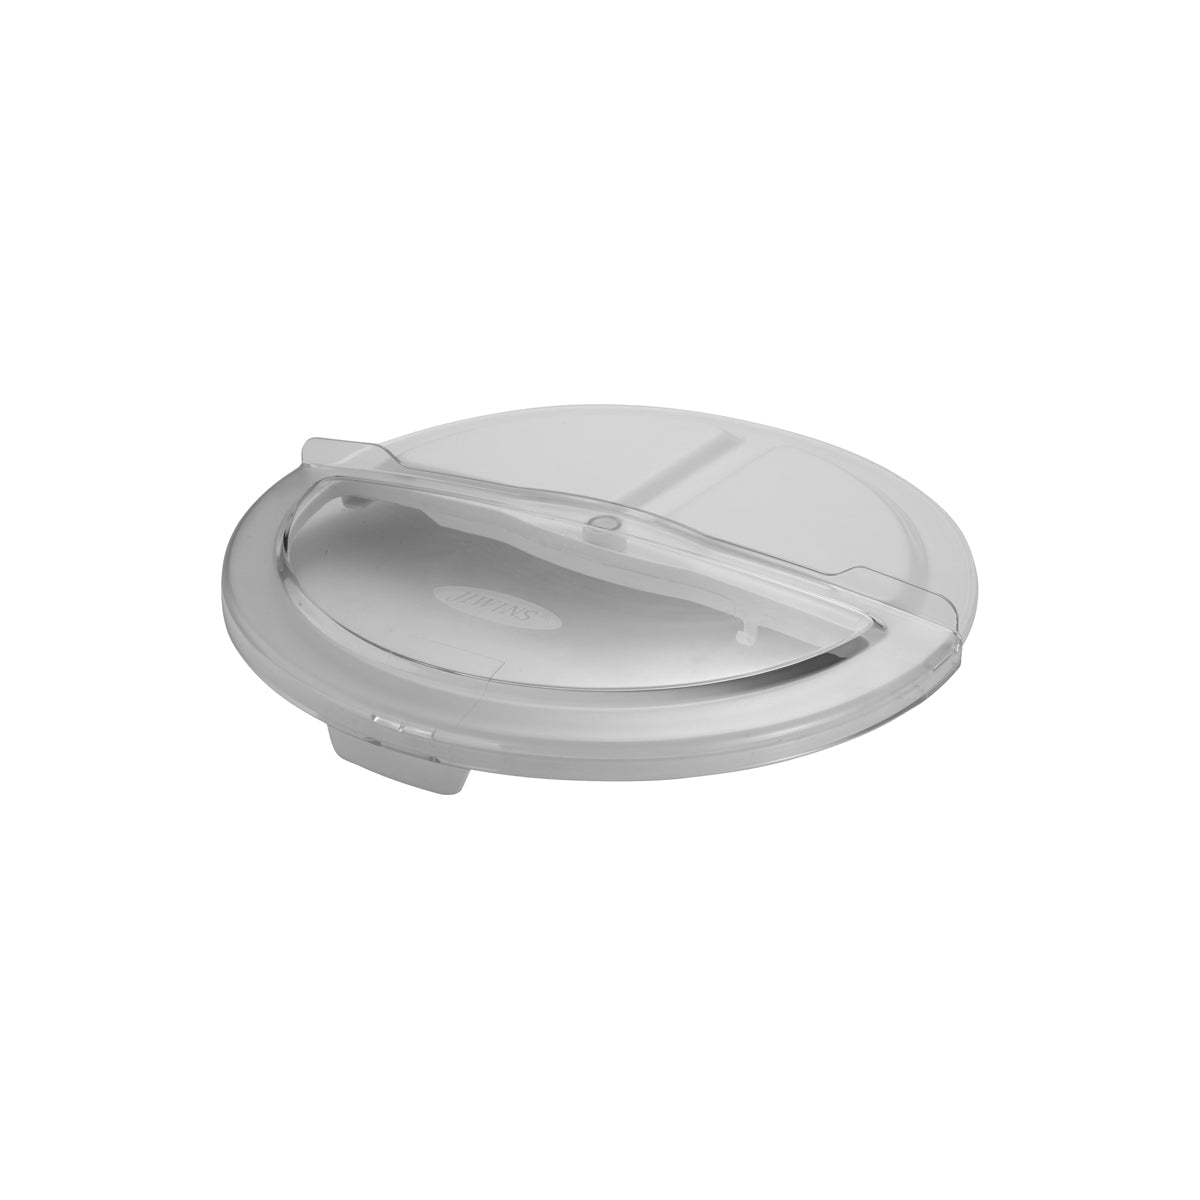 JW-CRCS38 Jiwins Sliding Lid to Suit 37.85Lt Round Ingredient Container Tomkin Australia Hospitality Supplies